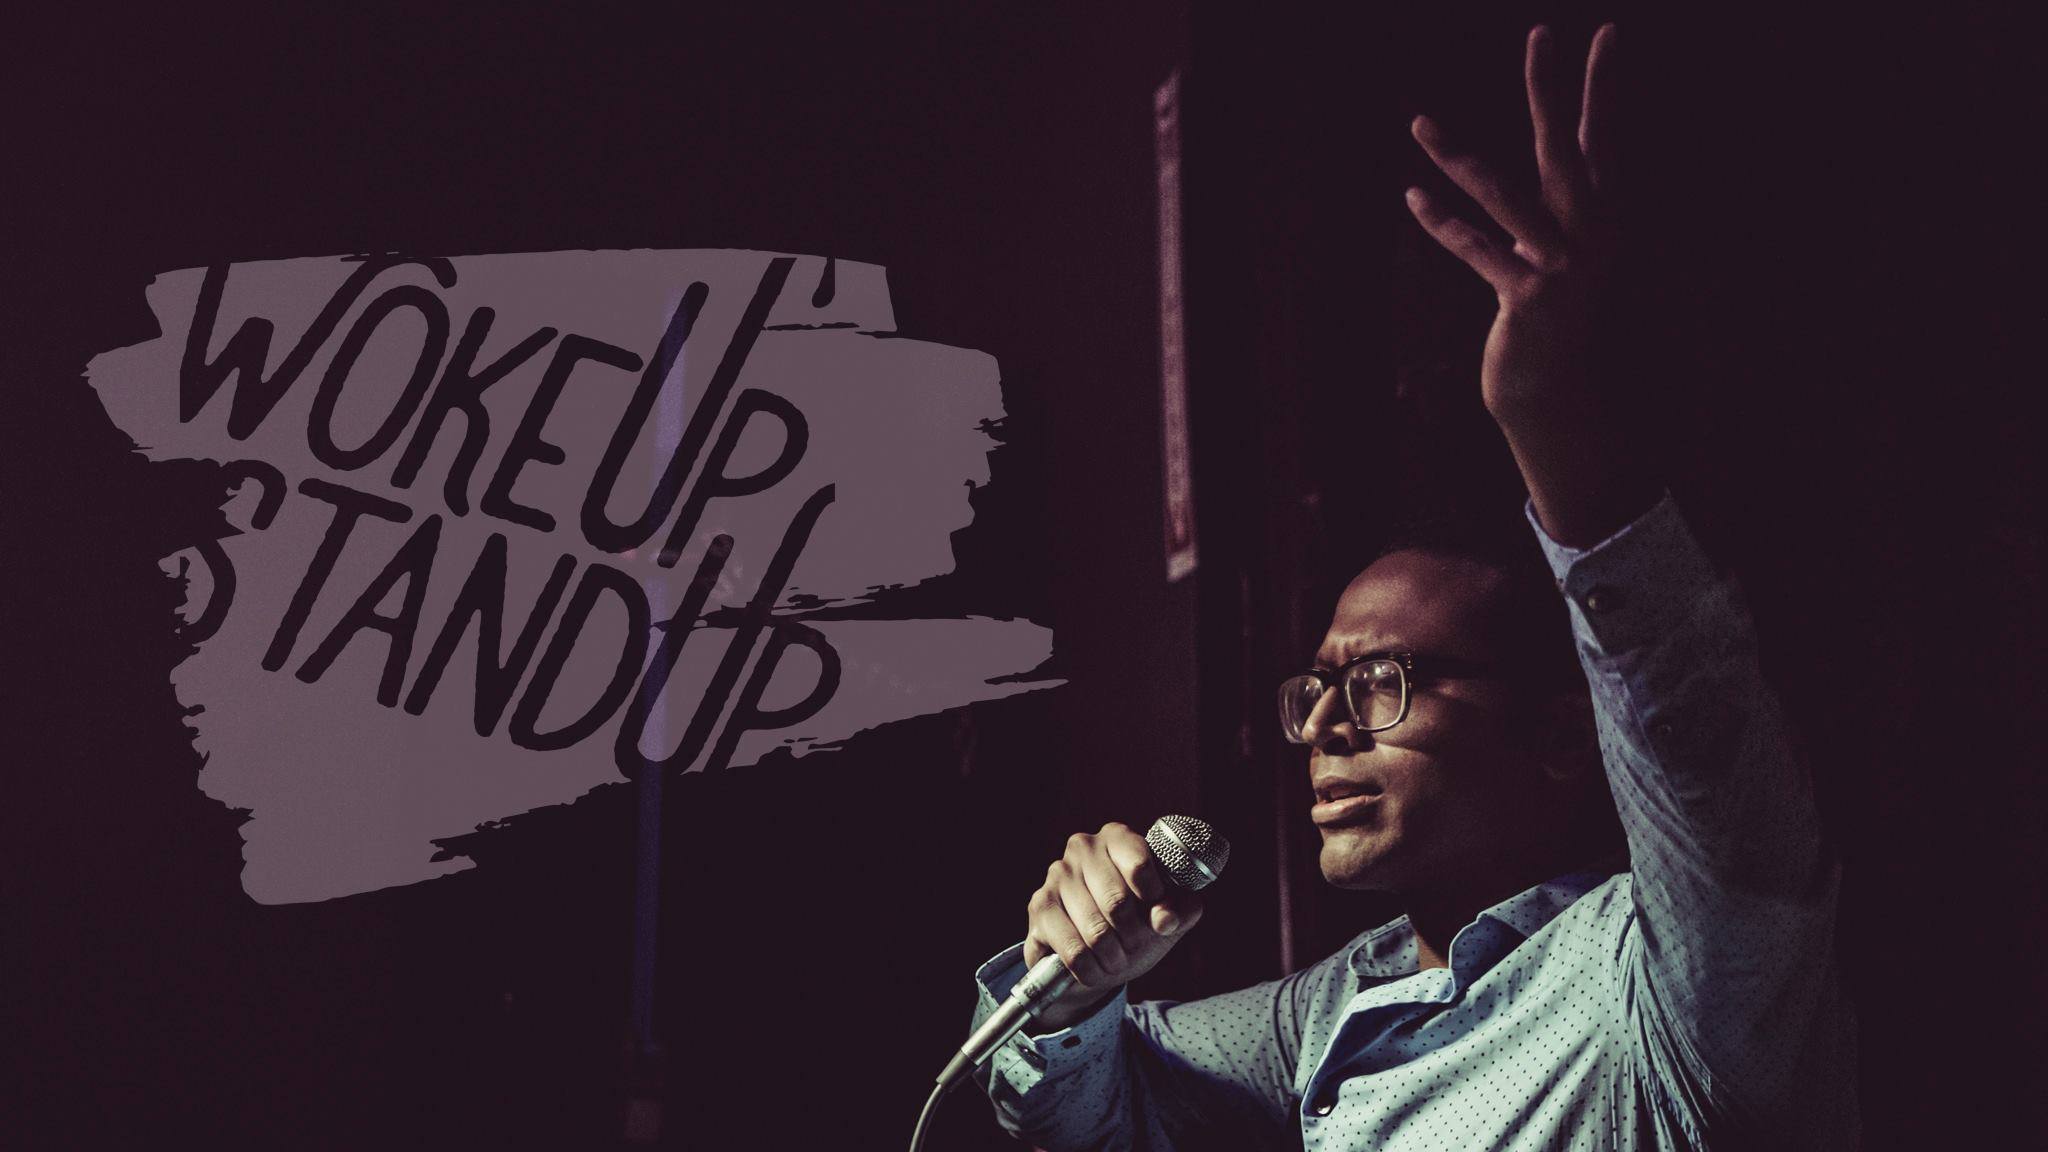 Woke Up Stand Up Brings You A Different Set of Comedy Headliners